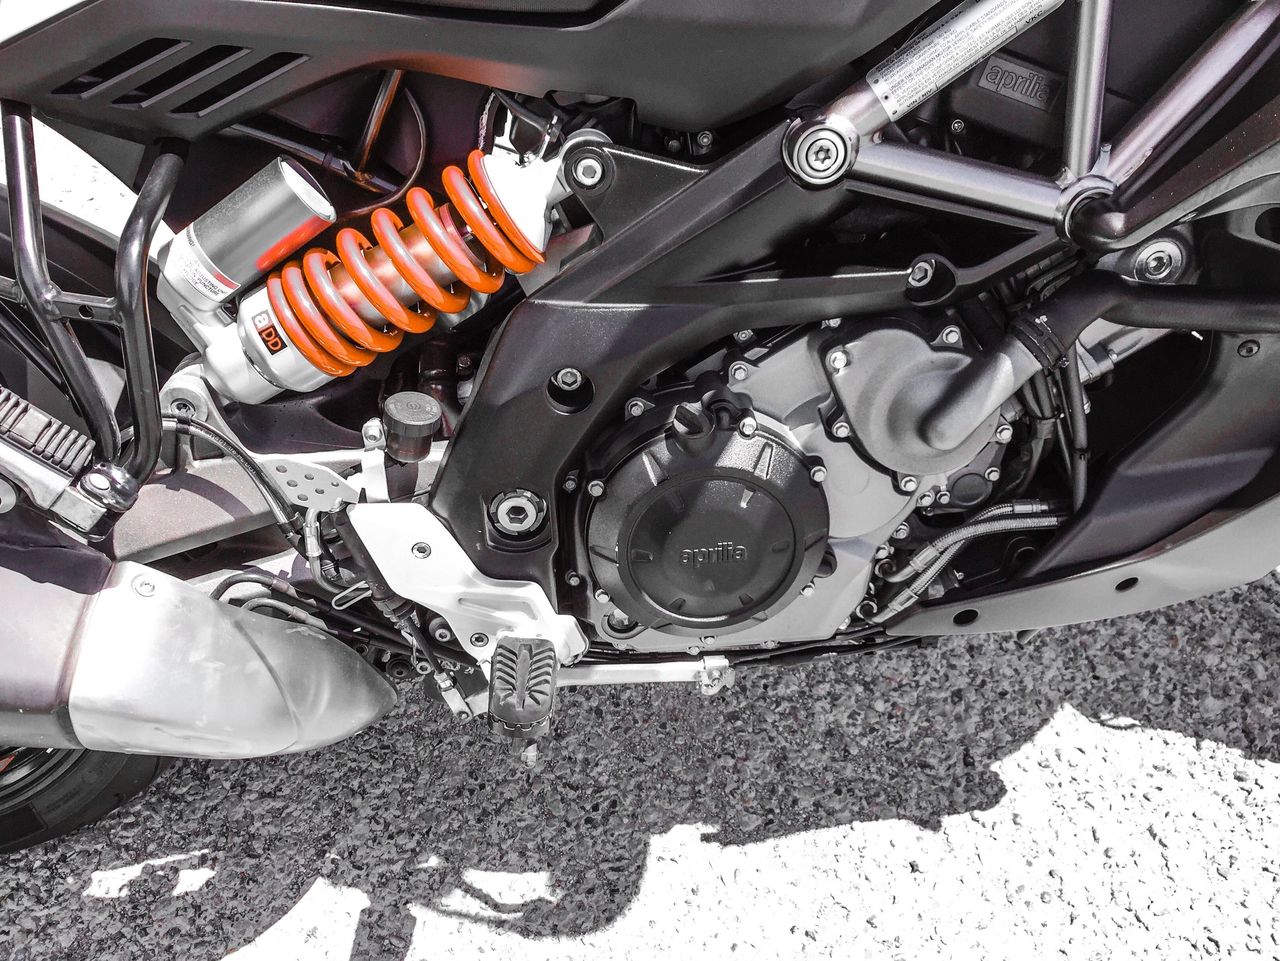 "a powerful 1190cc liquid-cooled V-twin engine that delivers 125 HP and 84.6 lb-ft of torque"